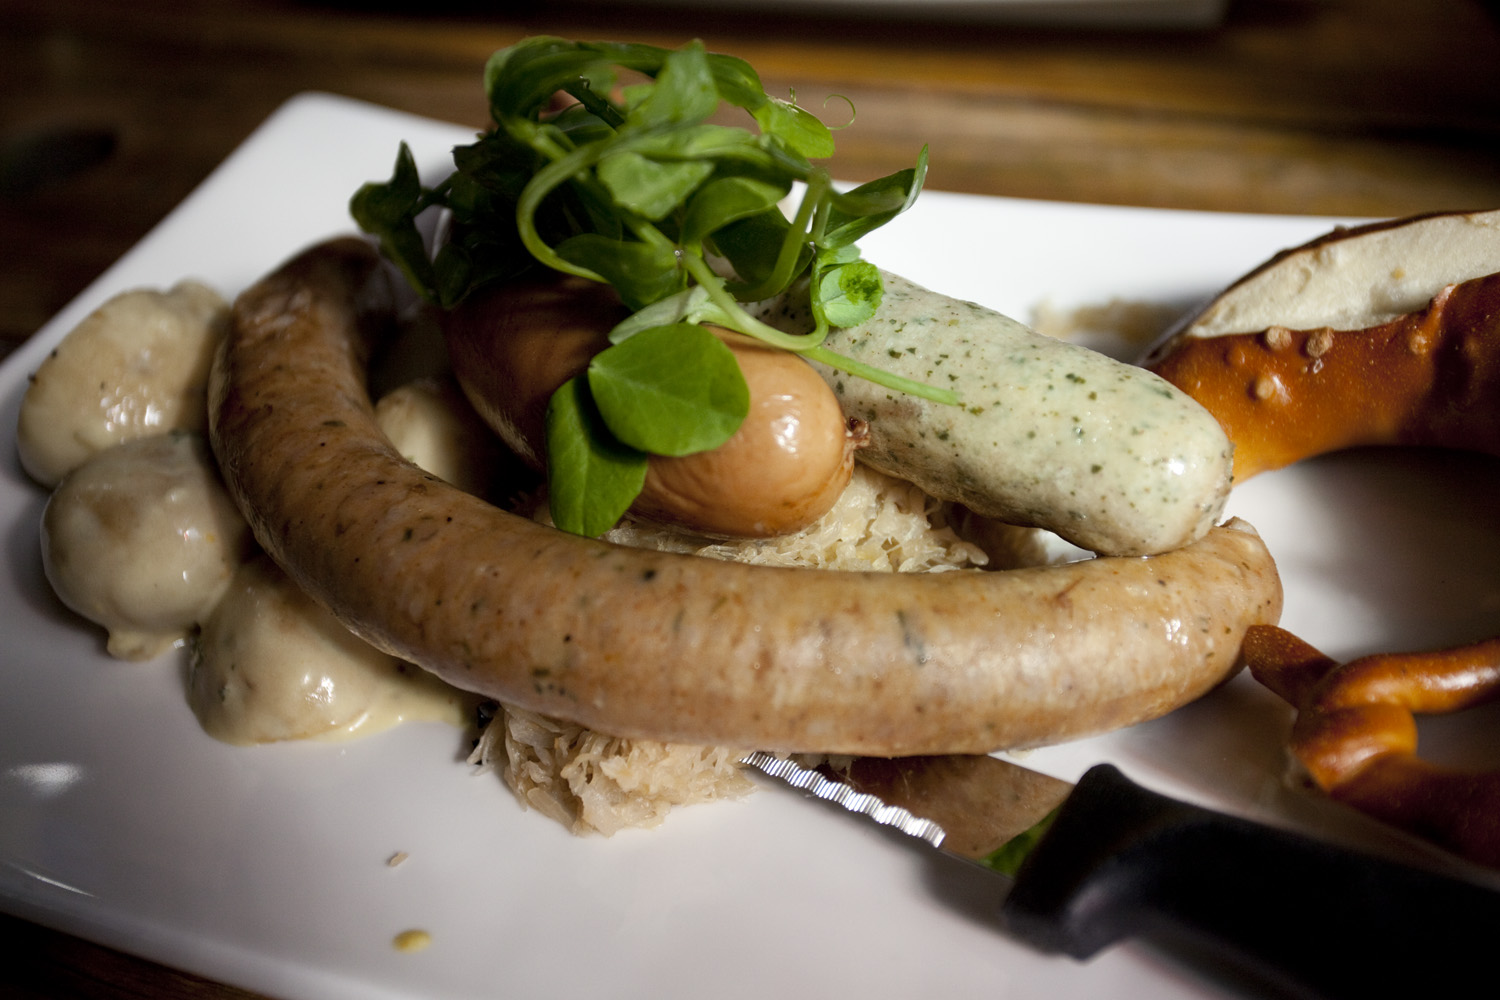 sausages and mushrooms served on a plate with a knife